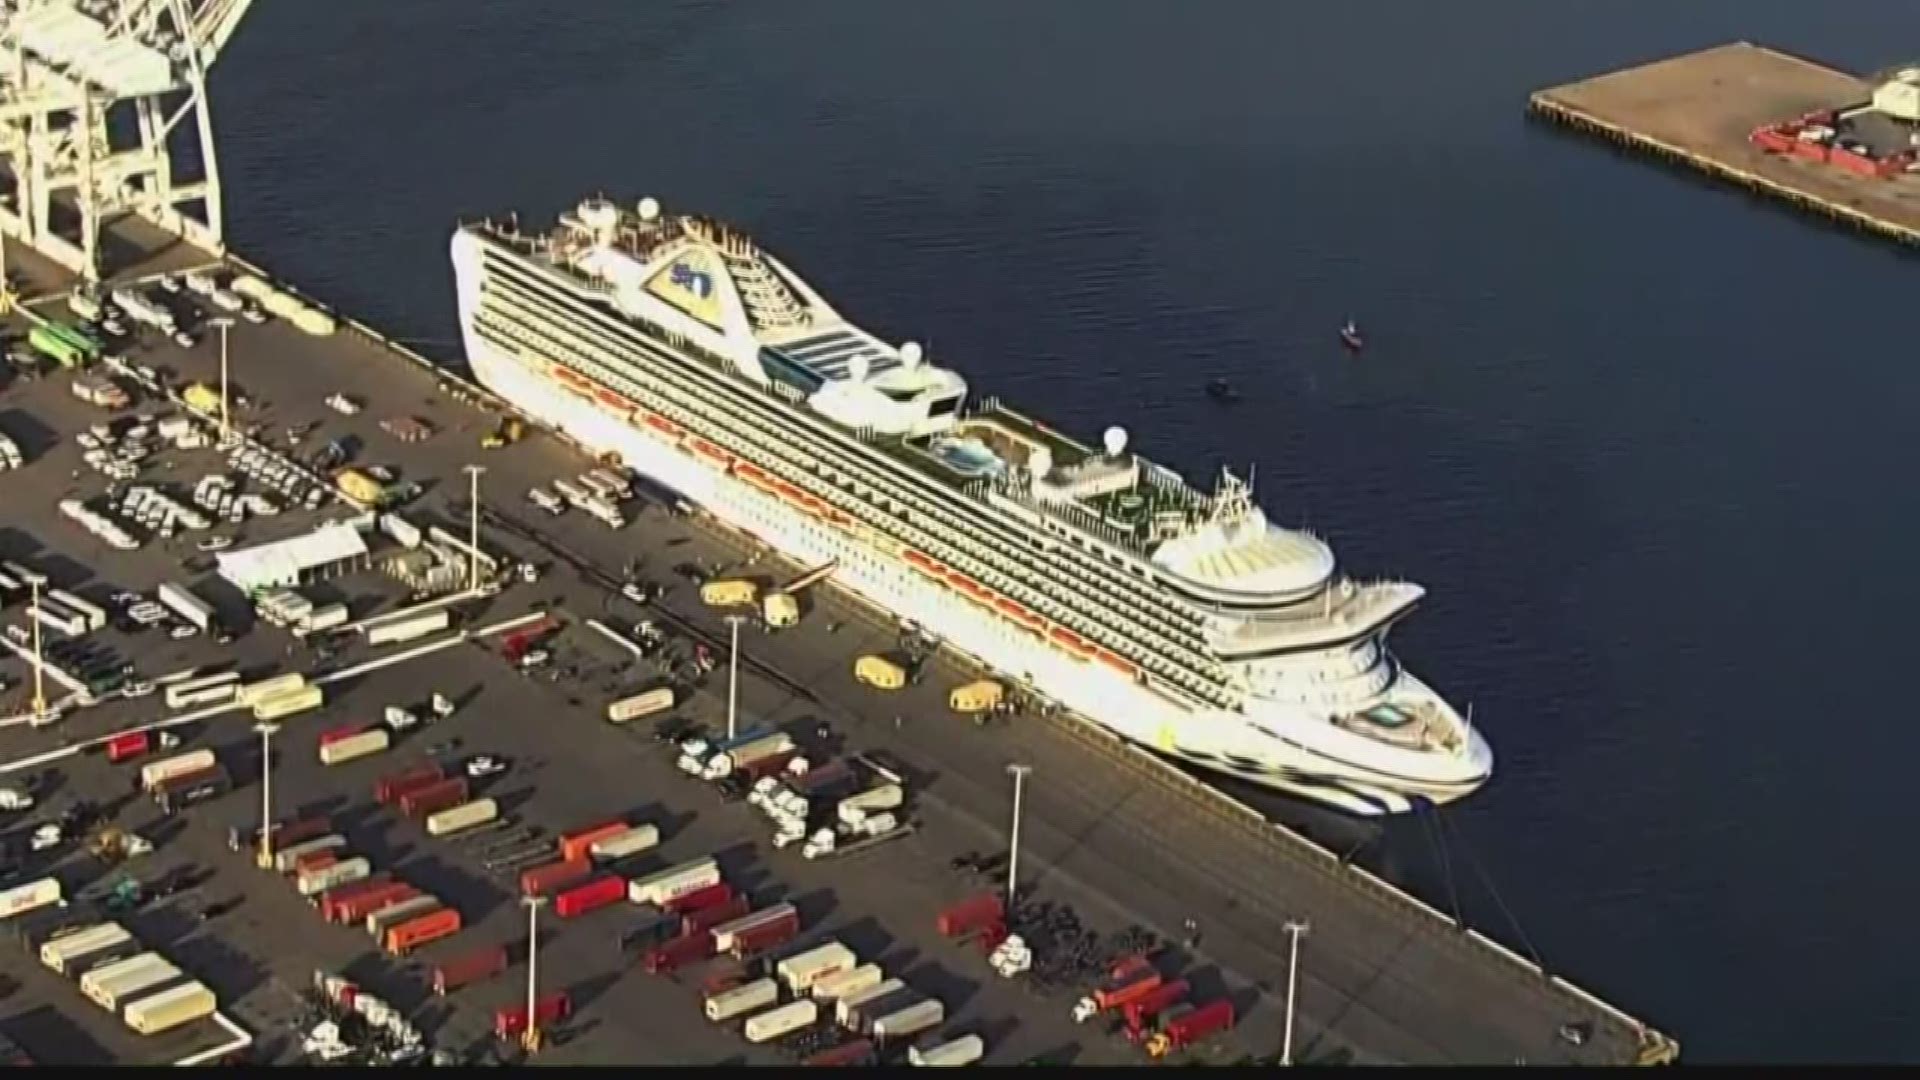 Two planes with more than 250 passengers who were on the Grand Princess cruise ship that finally docked at Oakland, California, are now due to arrive overnight.